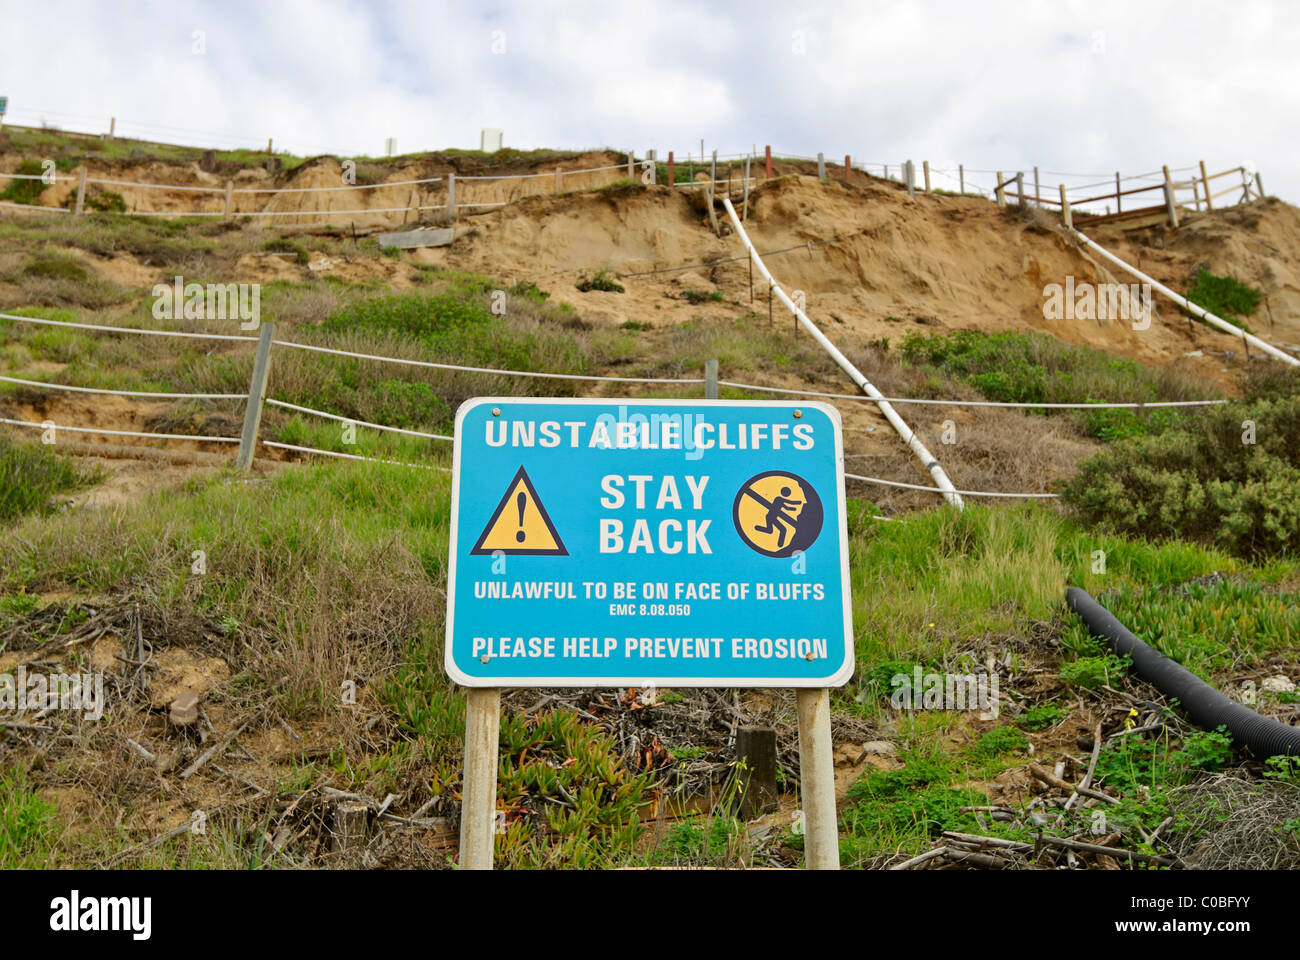 Hazard sign warning about unstable cliffs. Stock Photo